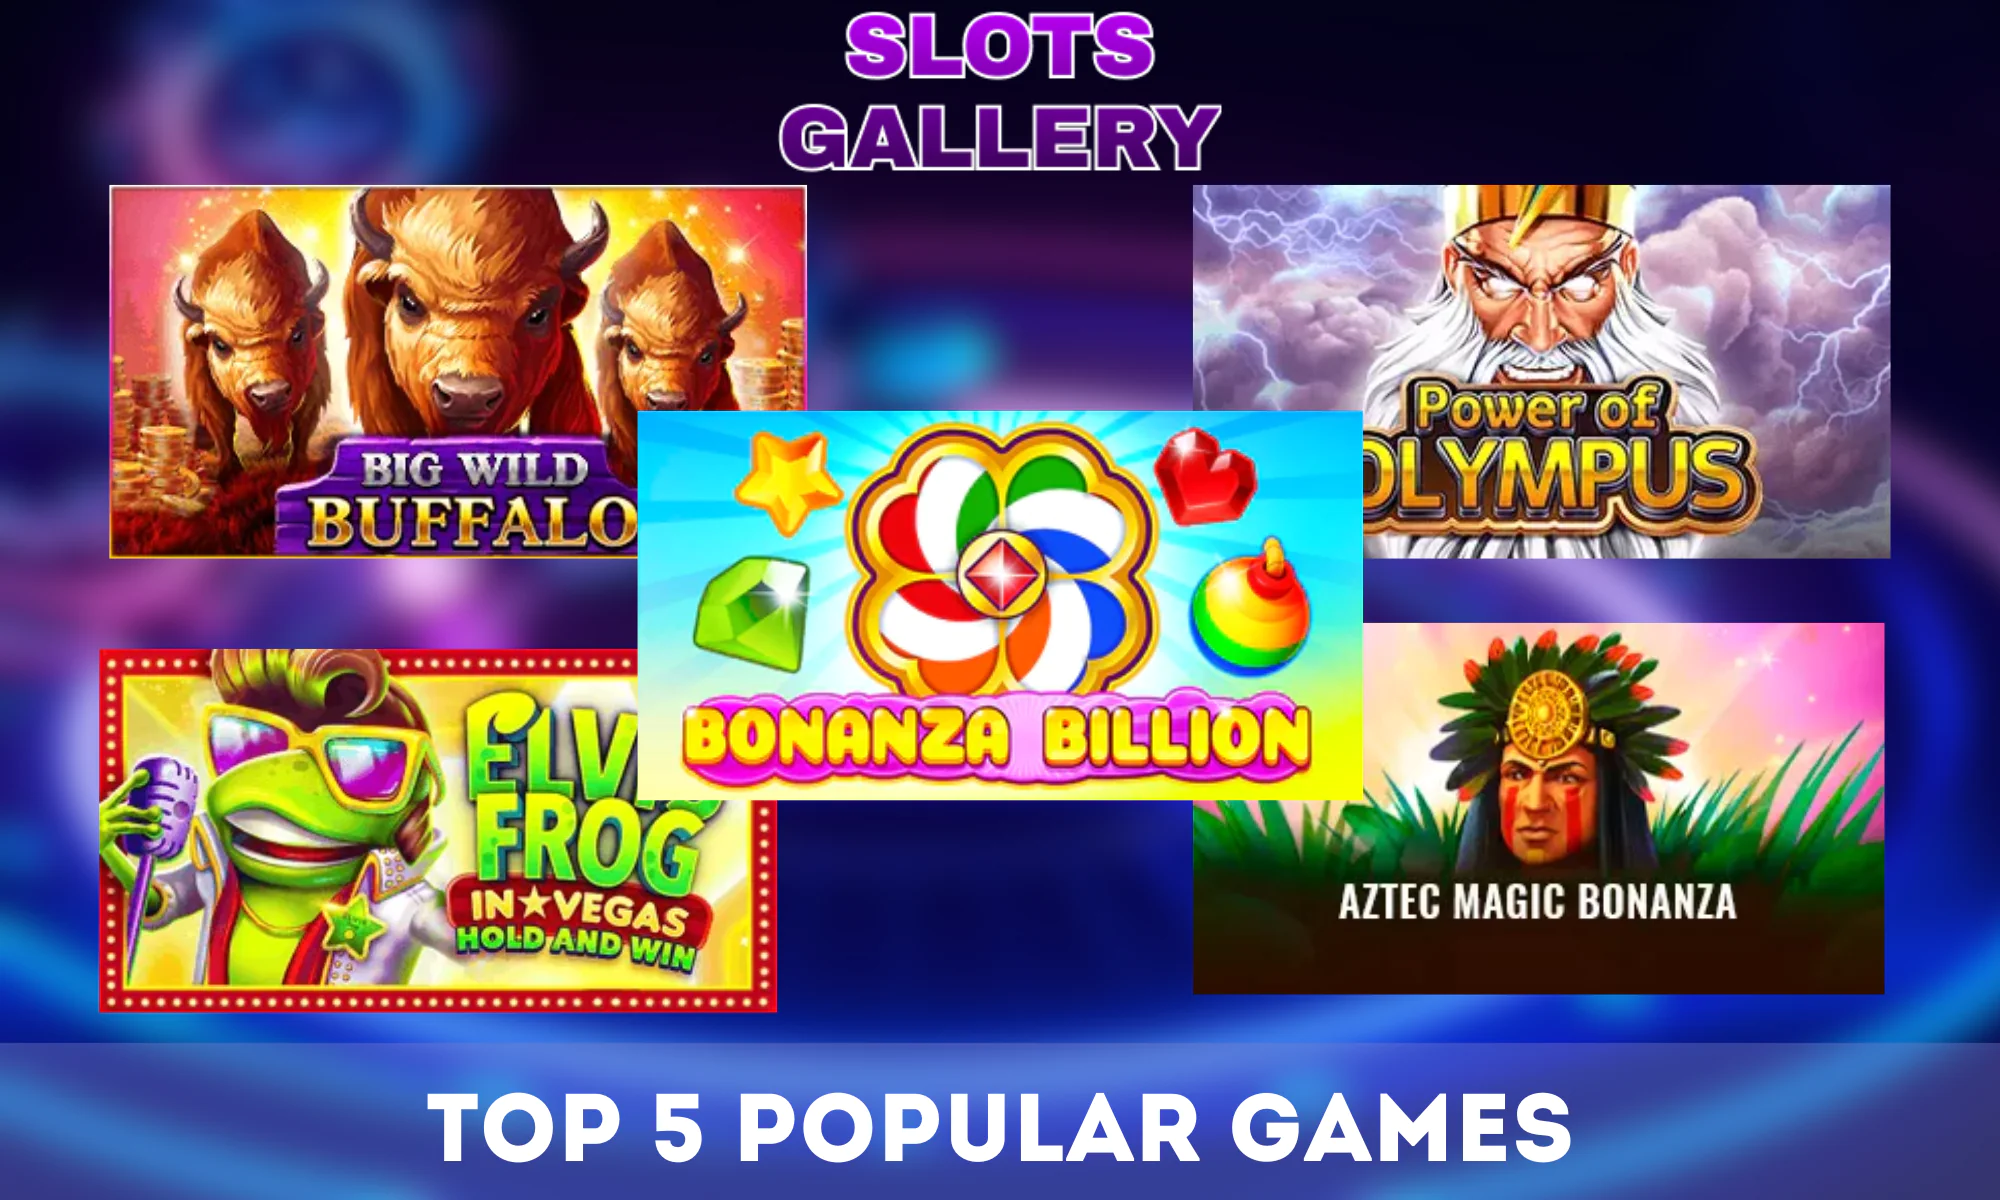 Slots Gallery has a wide selection of popular games